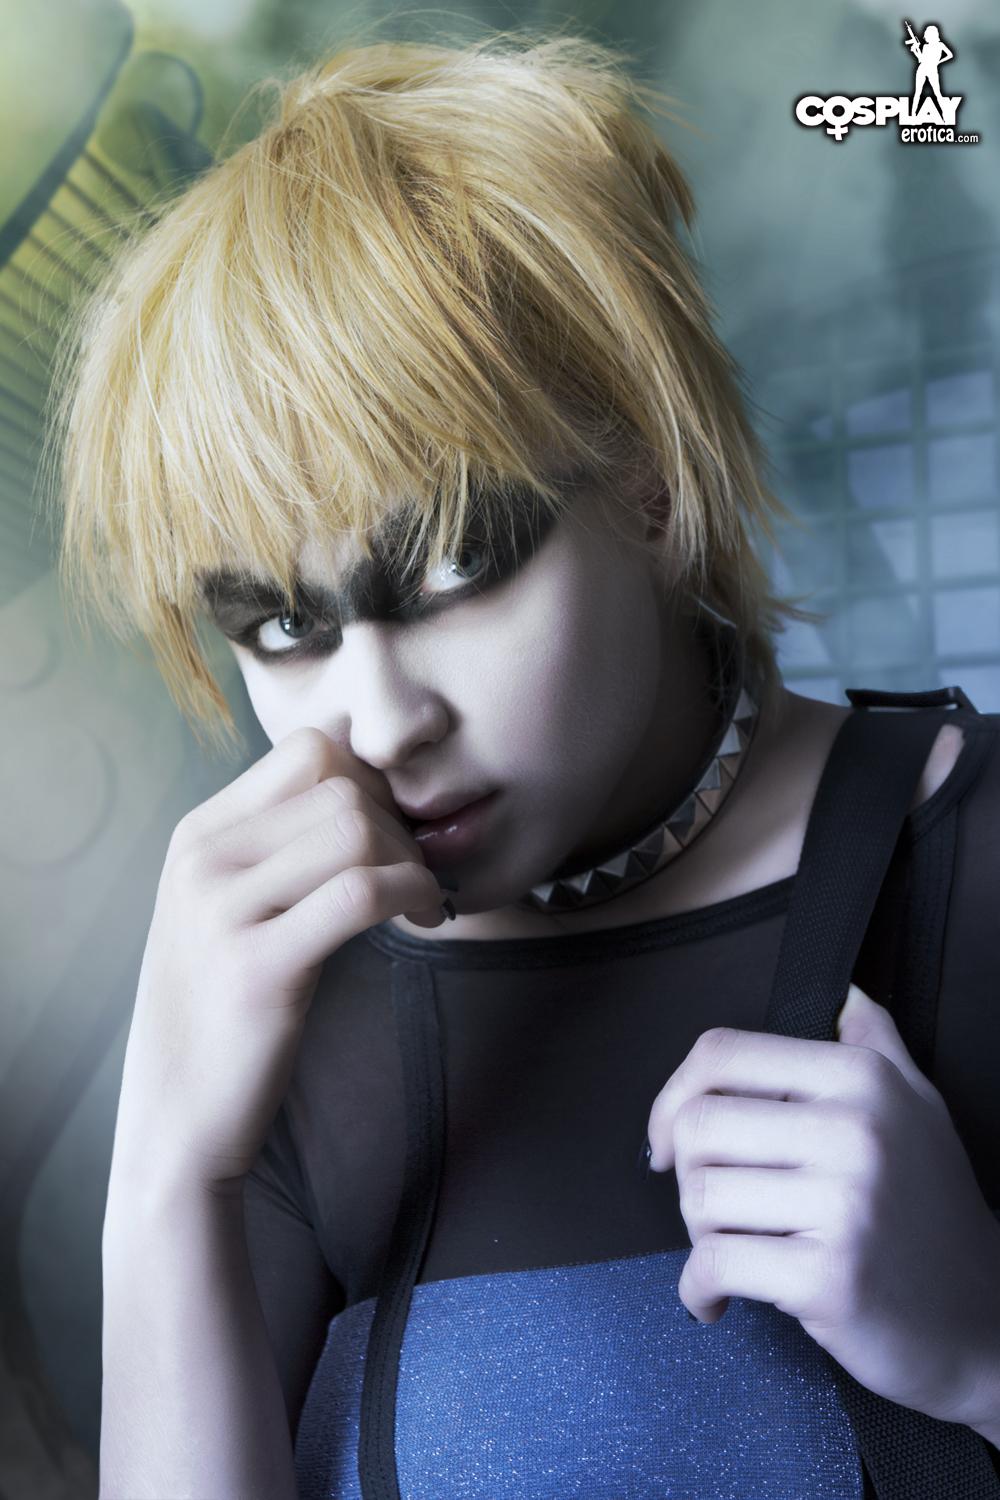 Cosplayer Kayla dresses up as Pris from Blade Runner #58176050